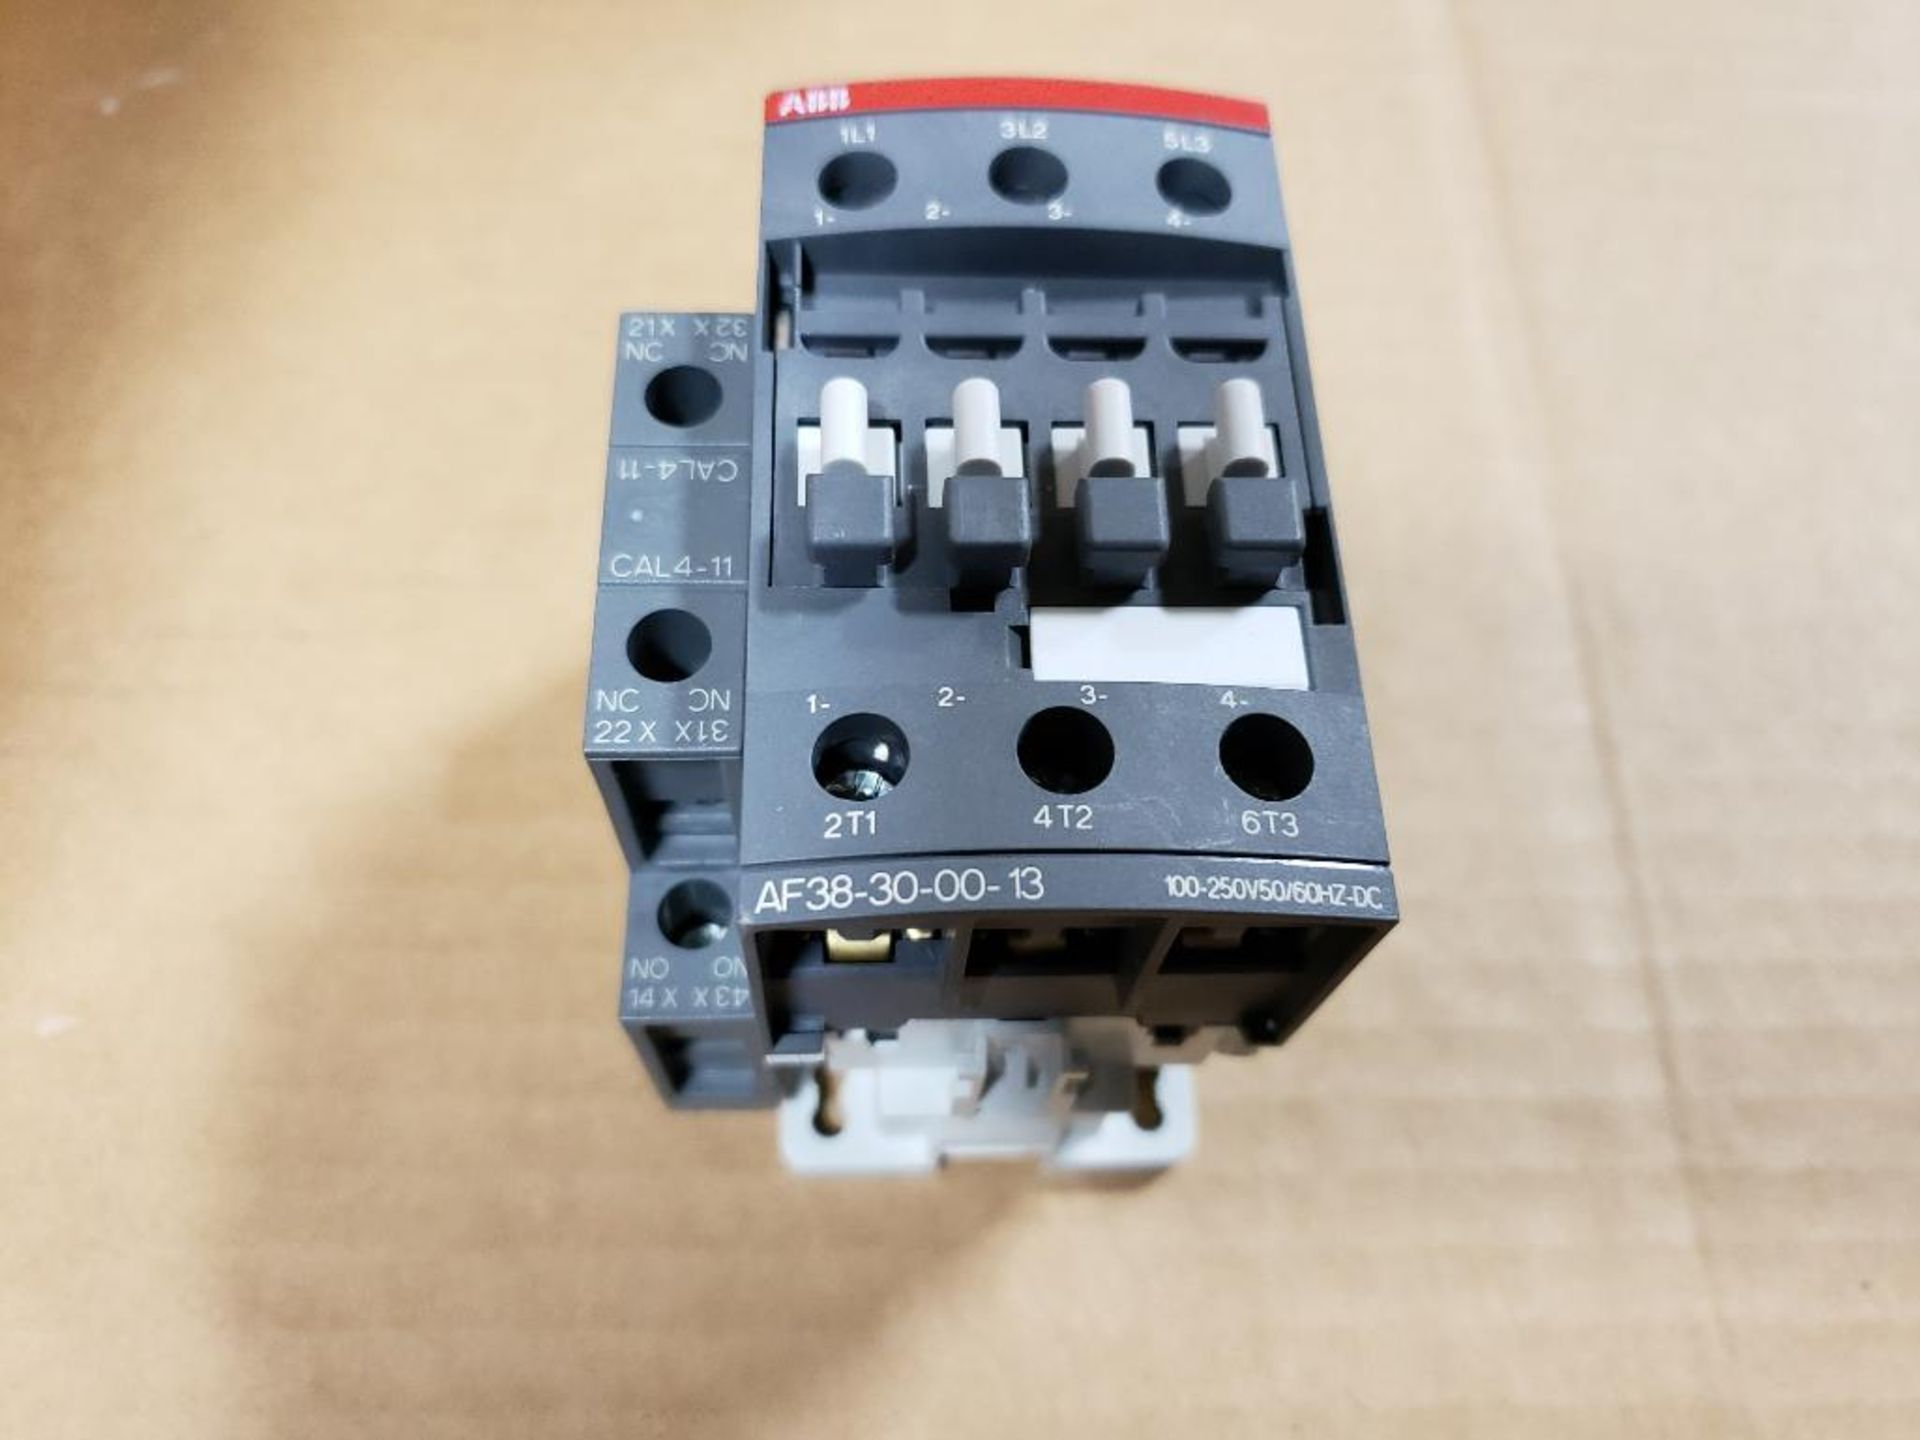 Qty 4 - ABB AF38-30-00-13 Contactor. New in box. - Image 5 of 6